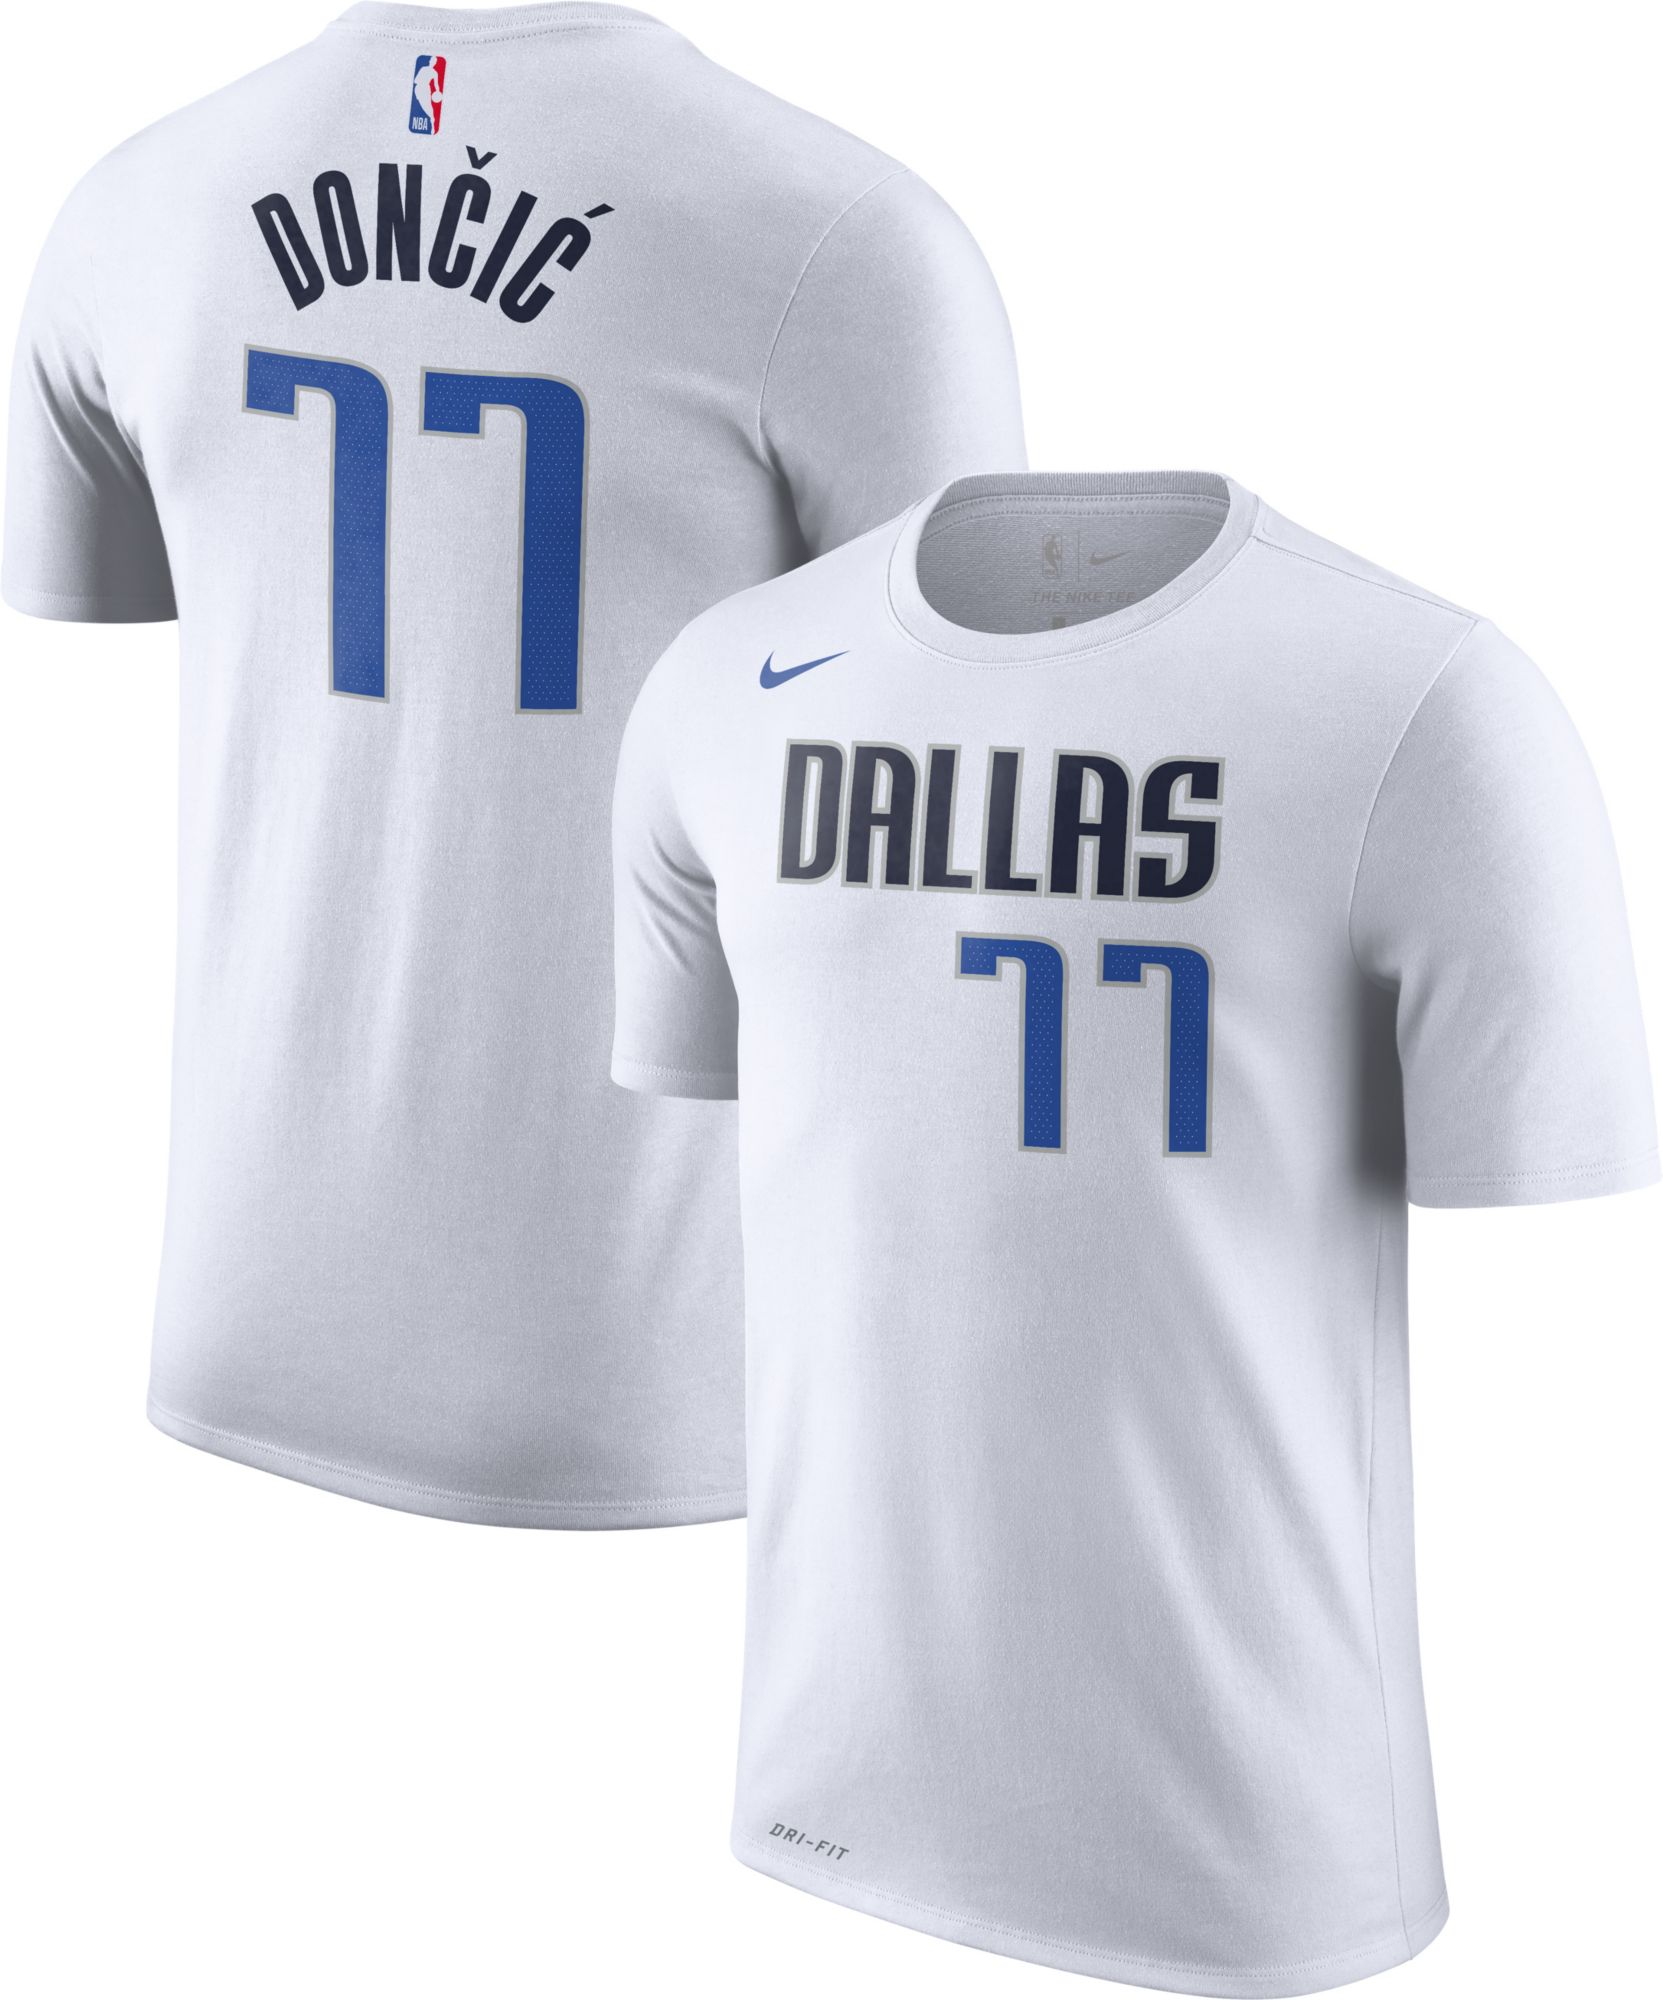 doncic jersey white